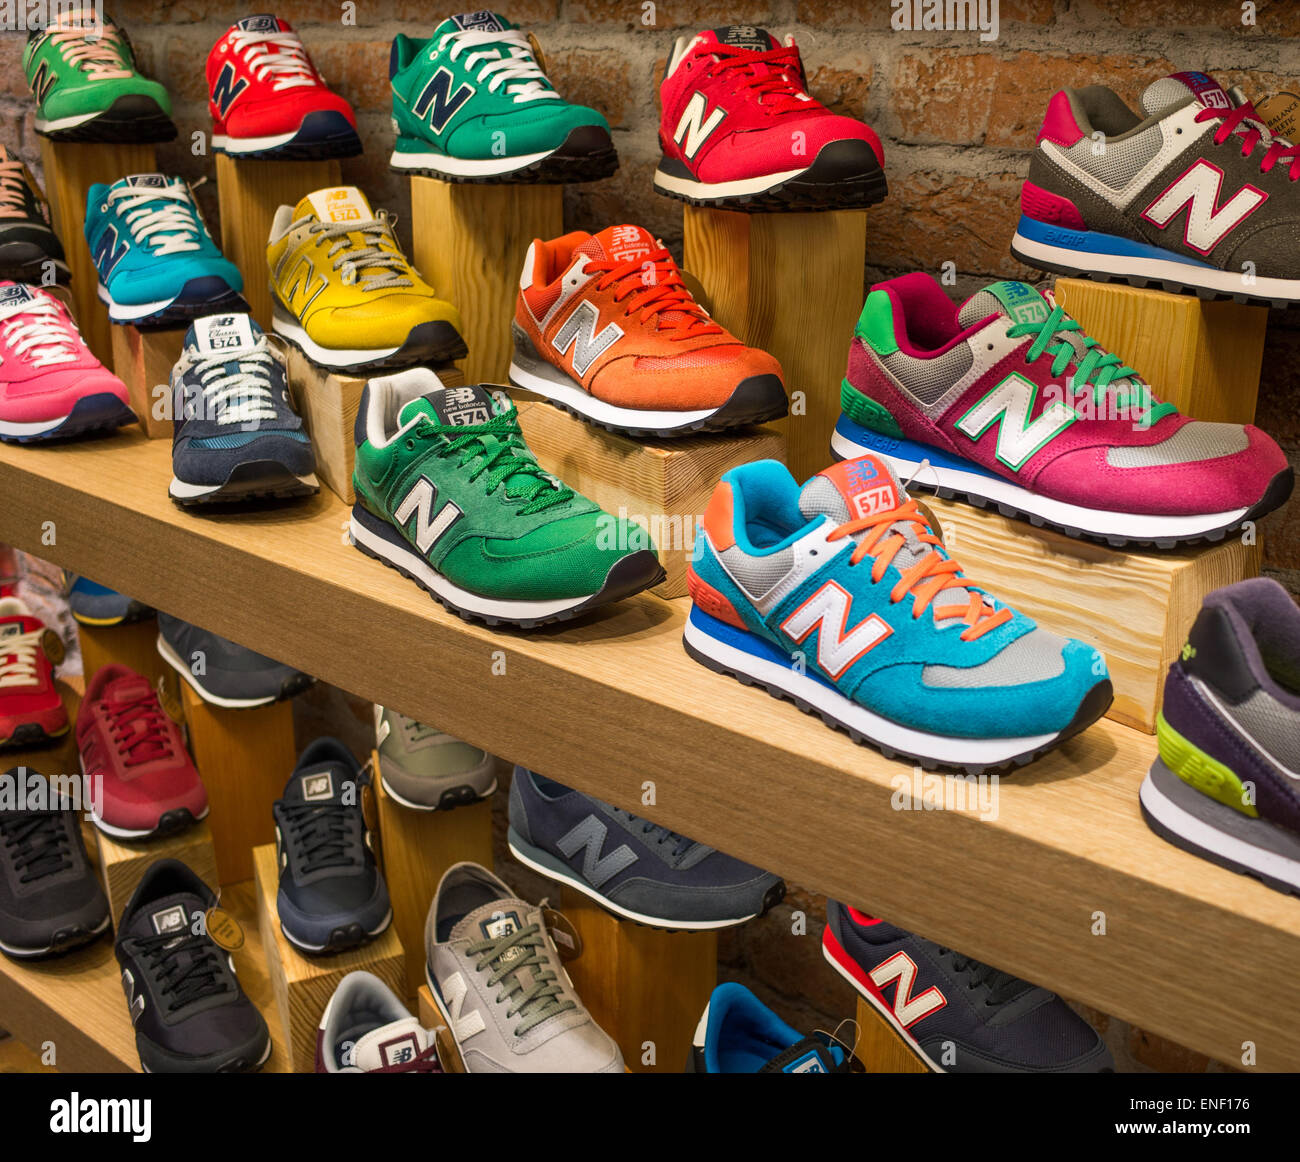 New Balance Trainers on display in a 